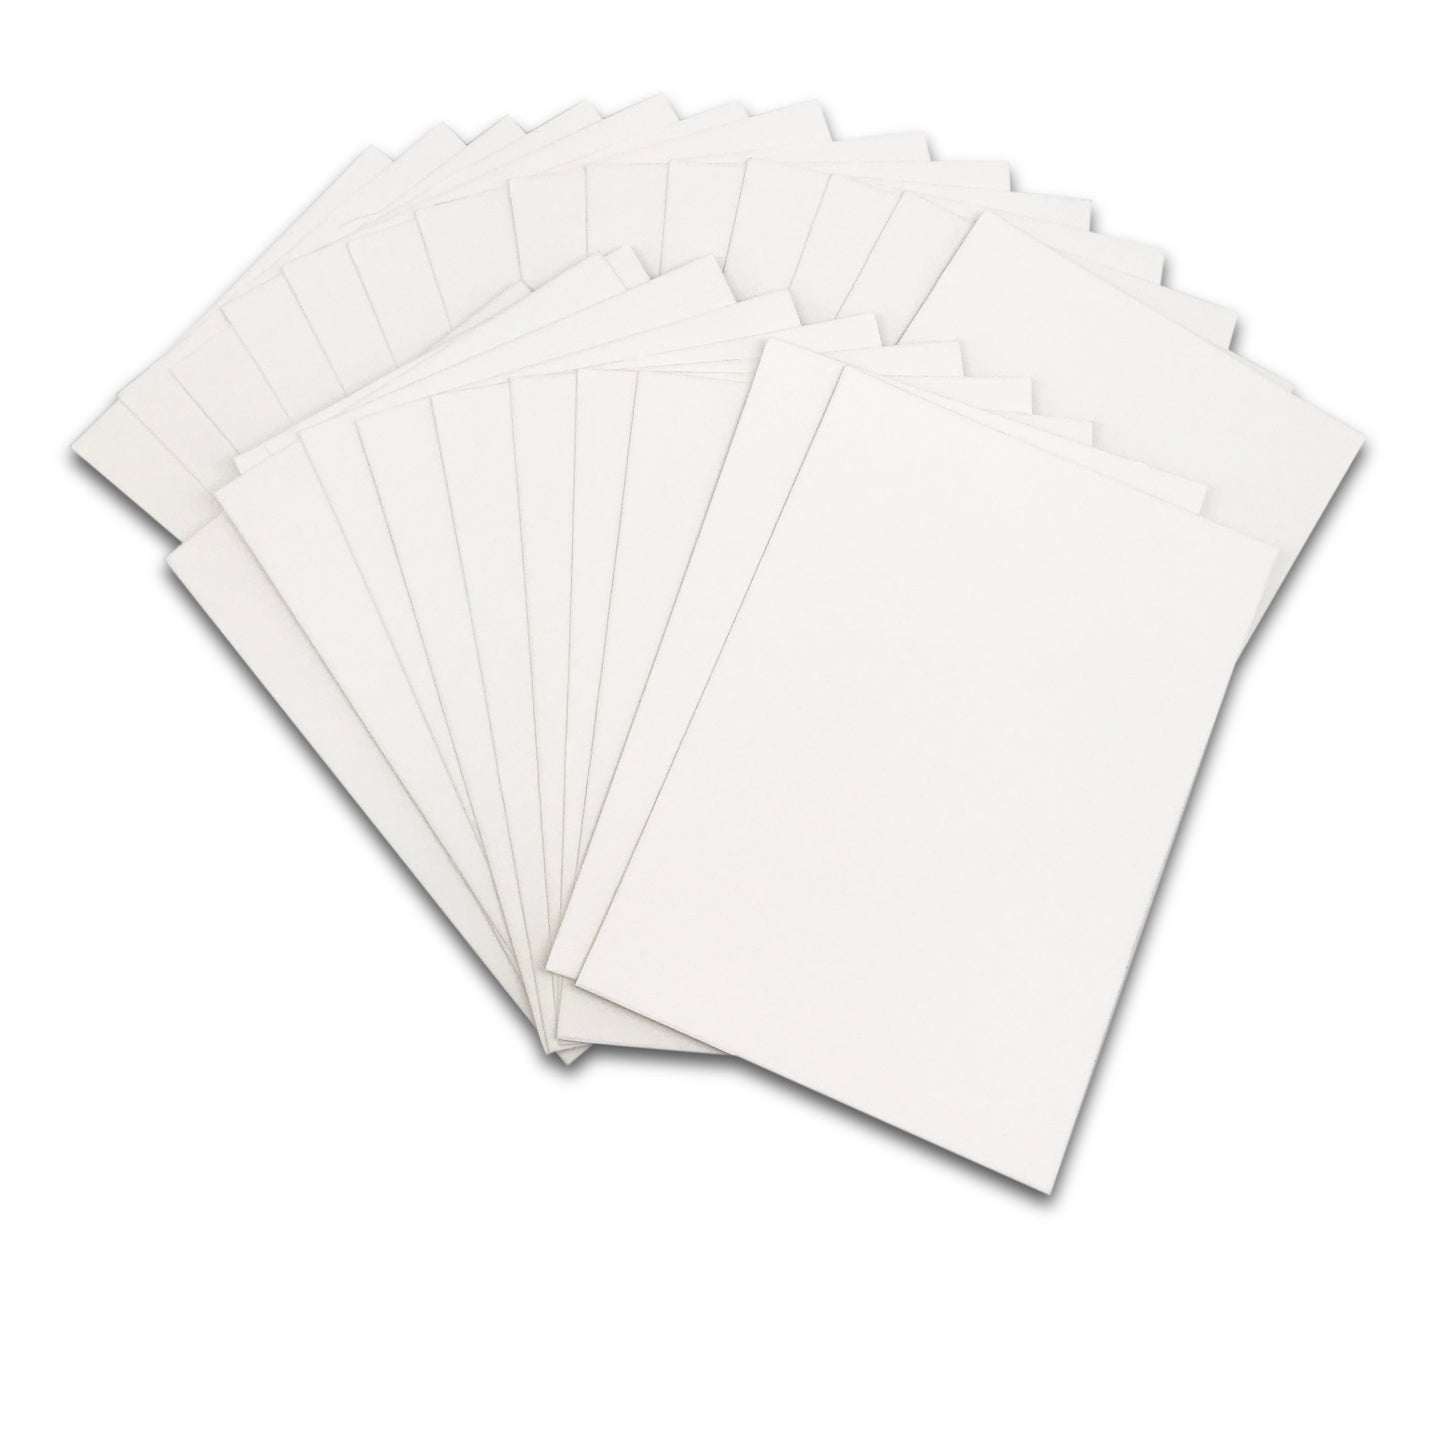 11" x 14" 50 Pack of Picture Frame Backing Boards